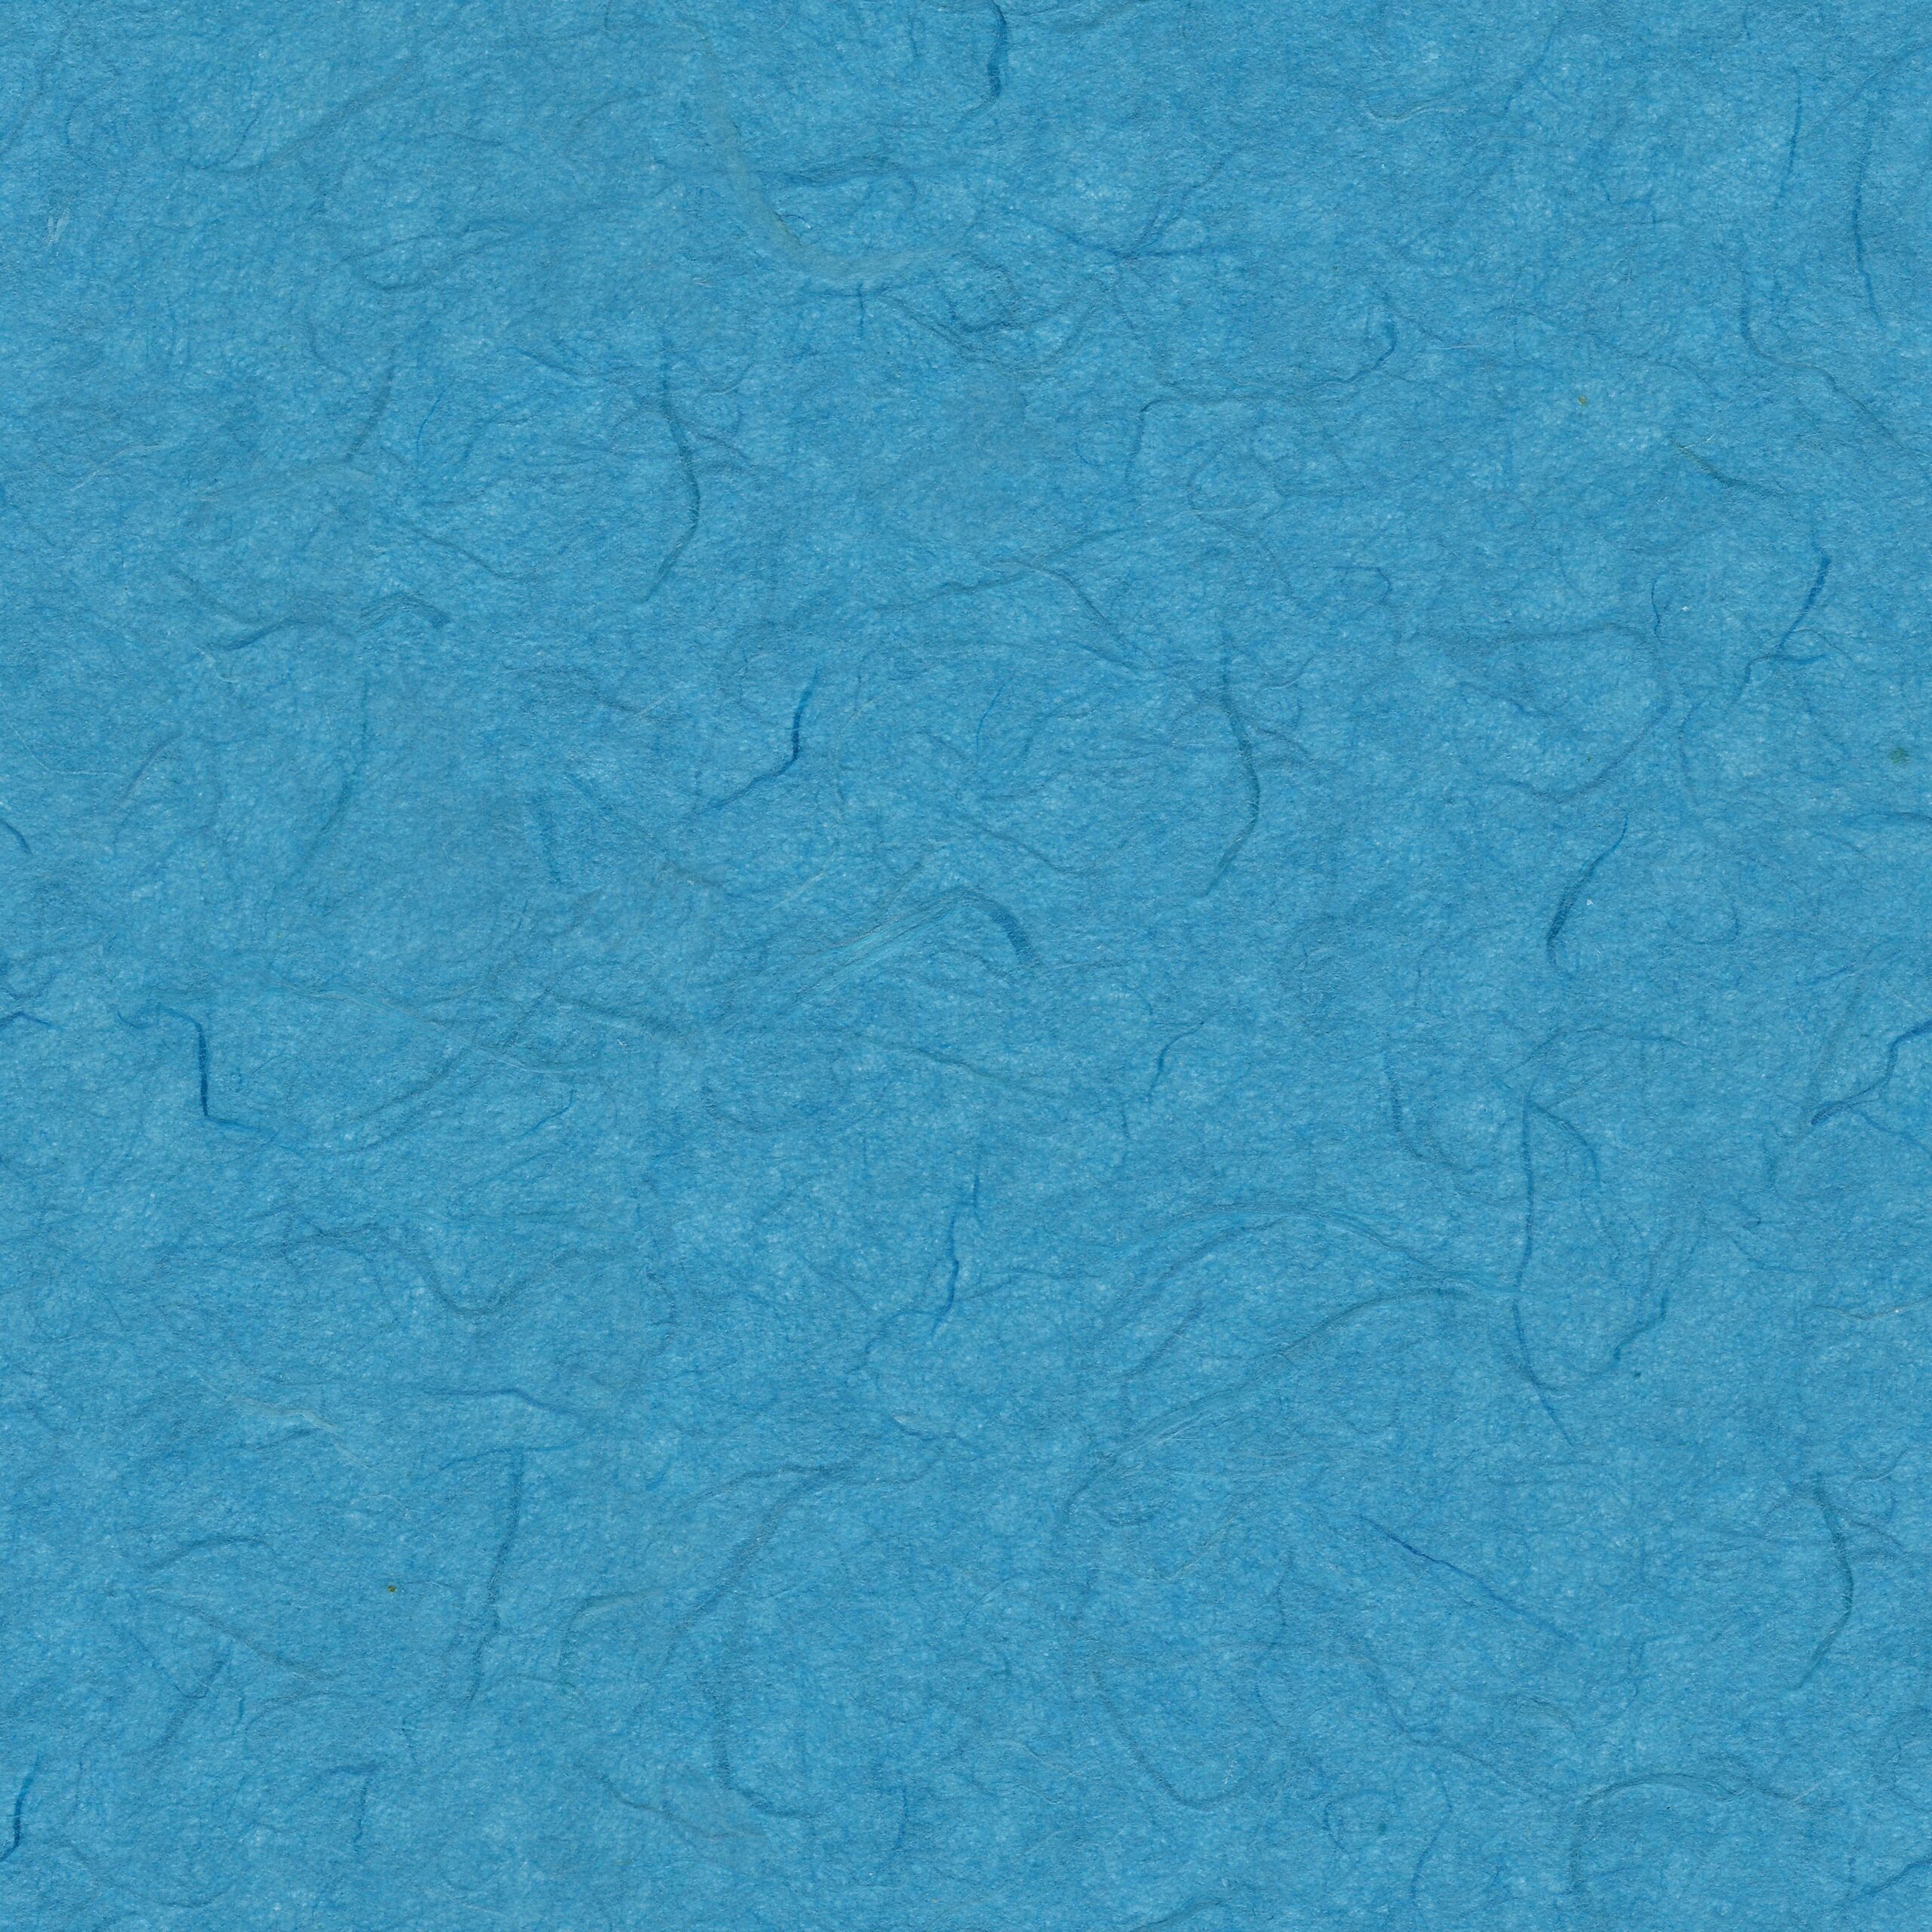 Handmade paper – Free Seamless Textures - All rights reseved